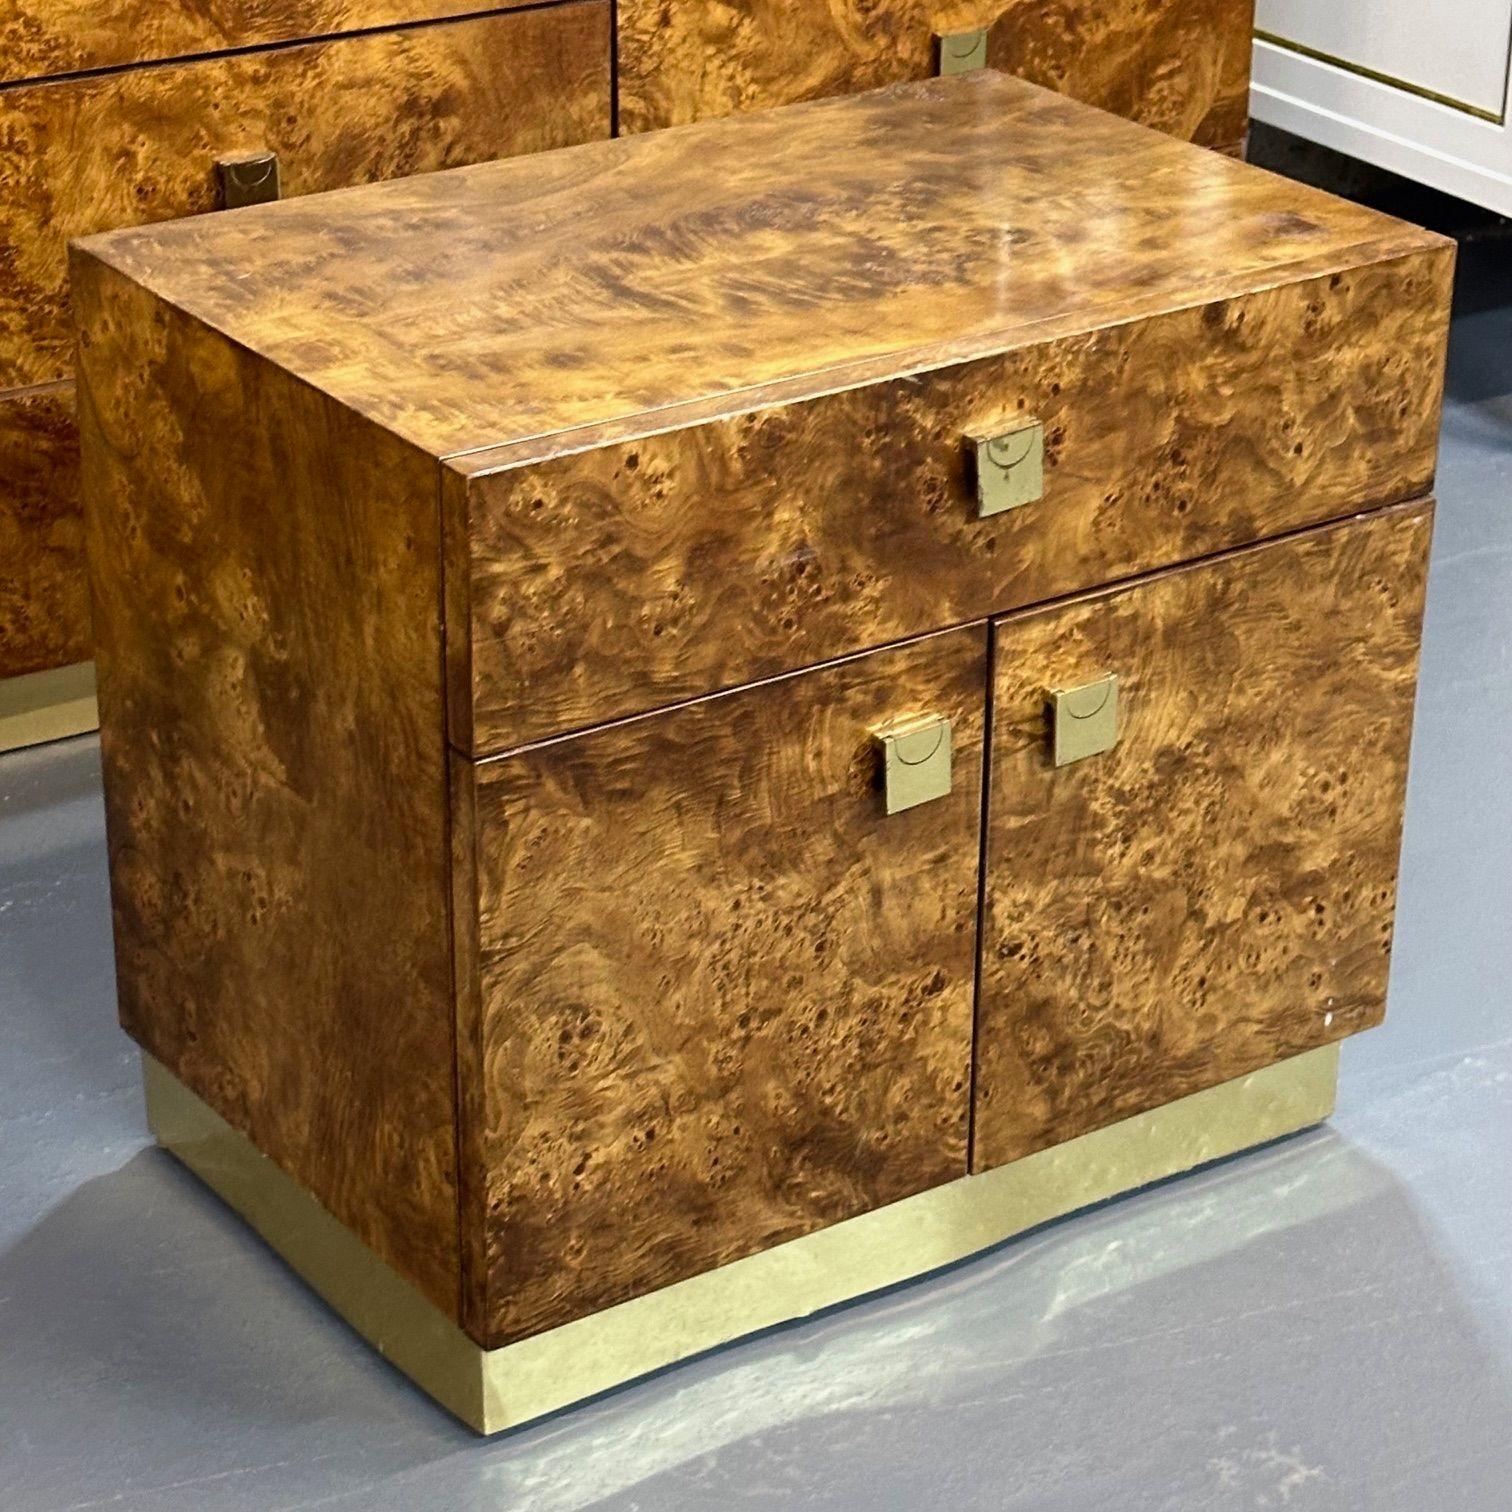 Founders, Mid-Century Modern, Nightstands, Burlwood, USA, 1970s

A nightstand with a single drawer over a storage compartment with two doors and nice hide-a-way handles. All rests on a chicly inset brass base. A matching dresser is available as well